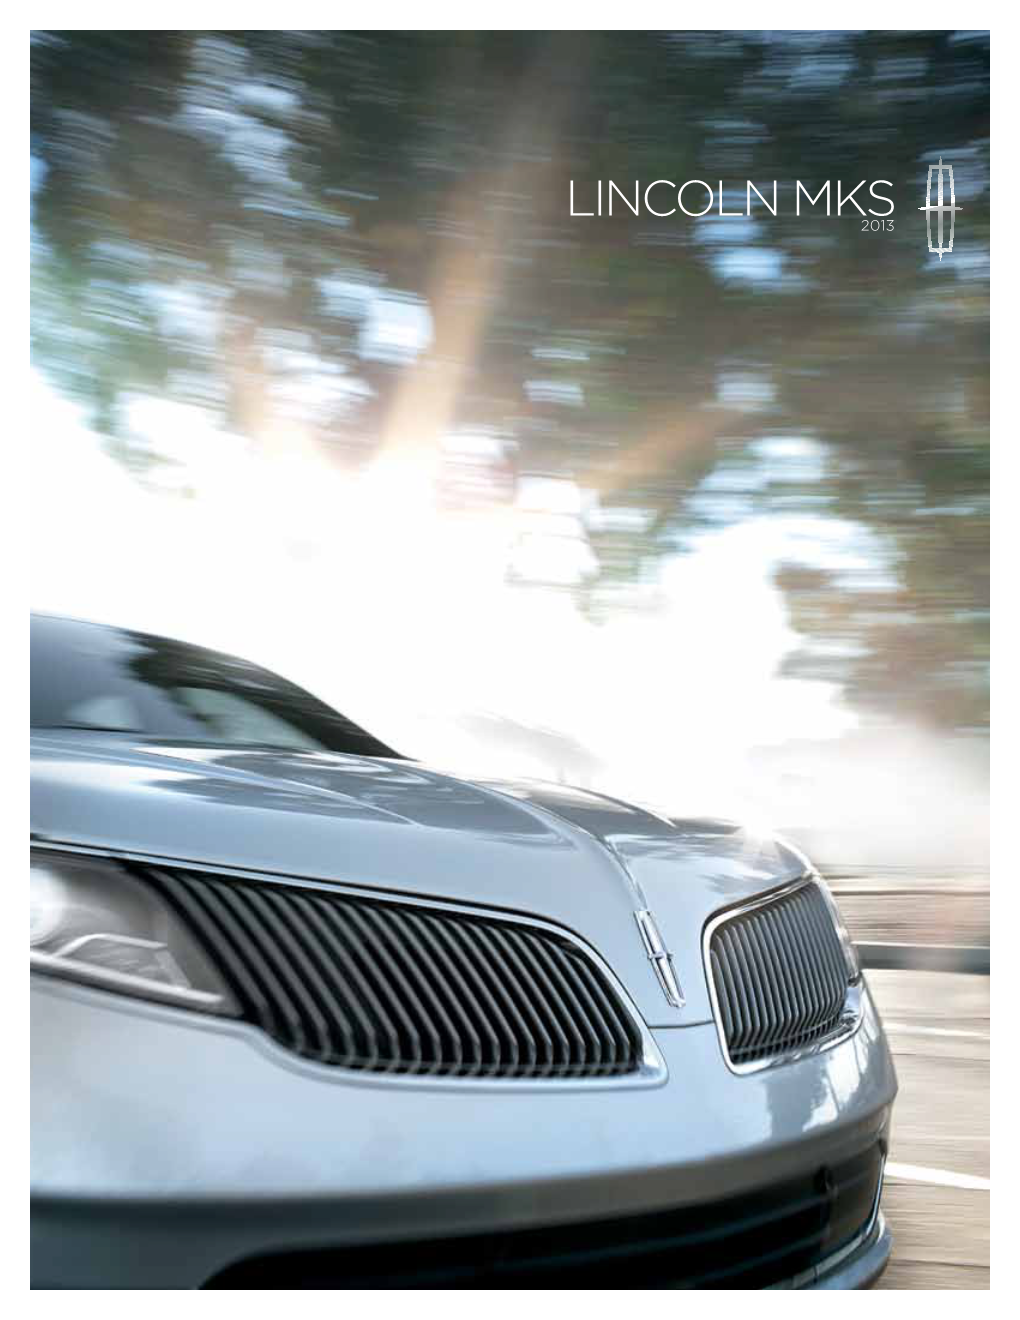 LINCOLN MKS 2013 Lincoln MKS Greets You with an Unexpected Combination